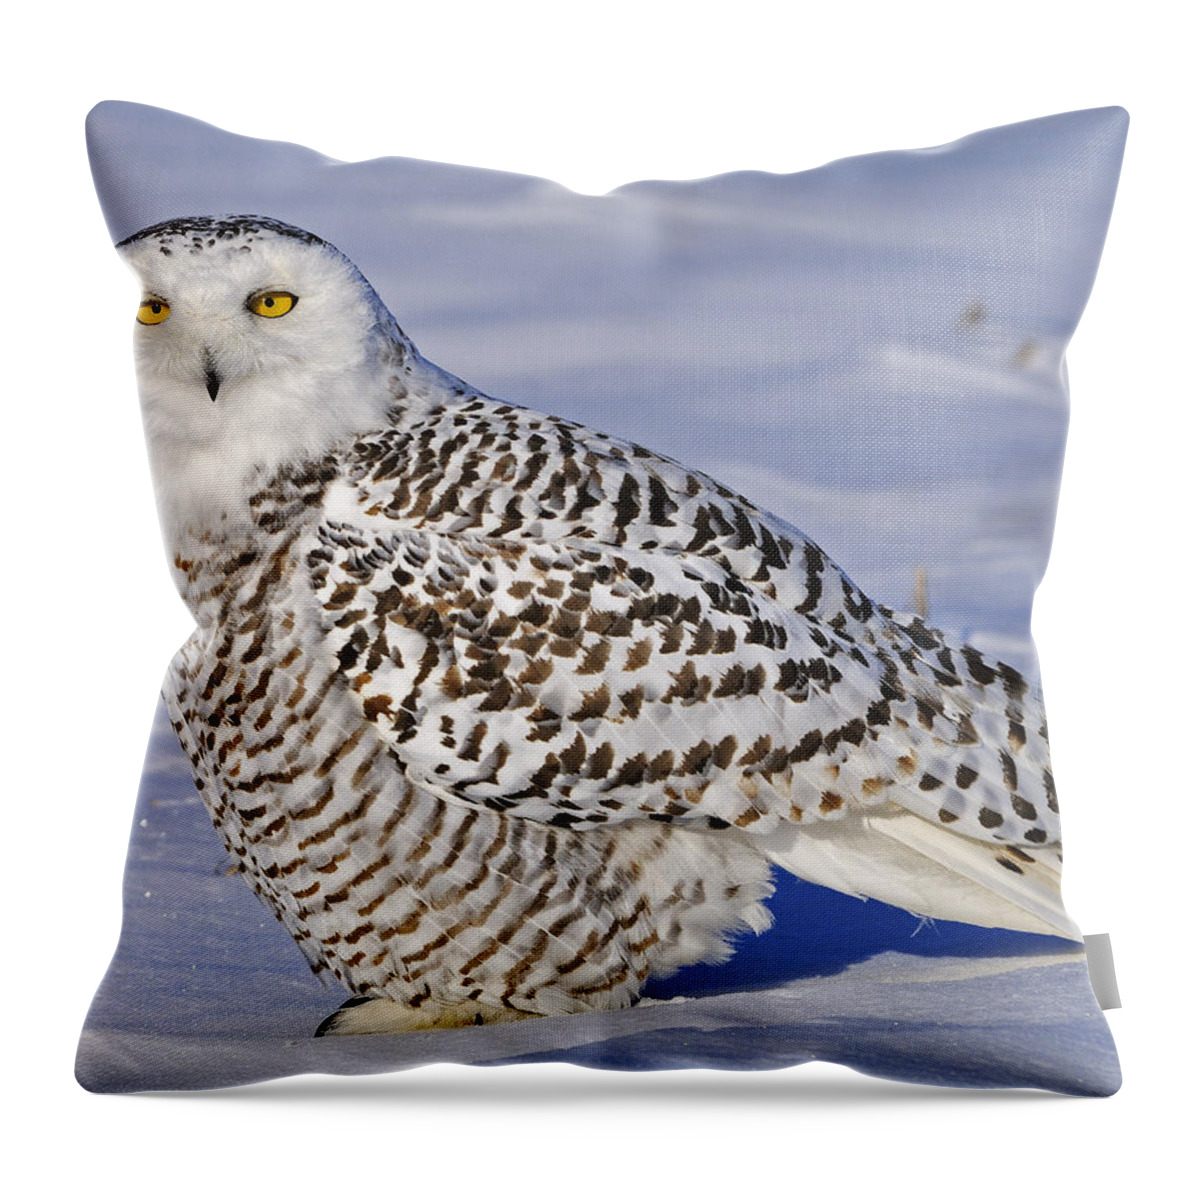 Snowy Owl Throw Pillow featuring the photograph Young Snowy Owl by Tony Beck